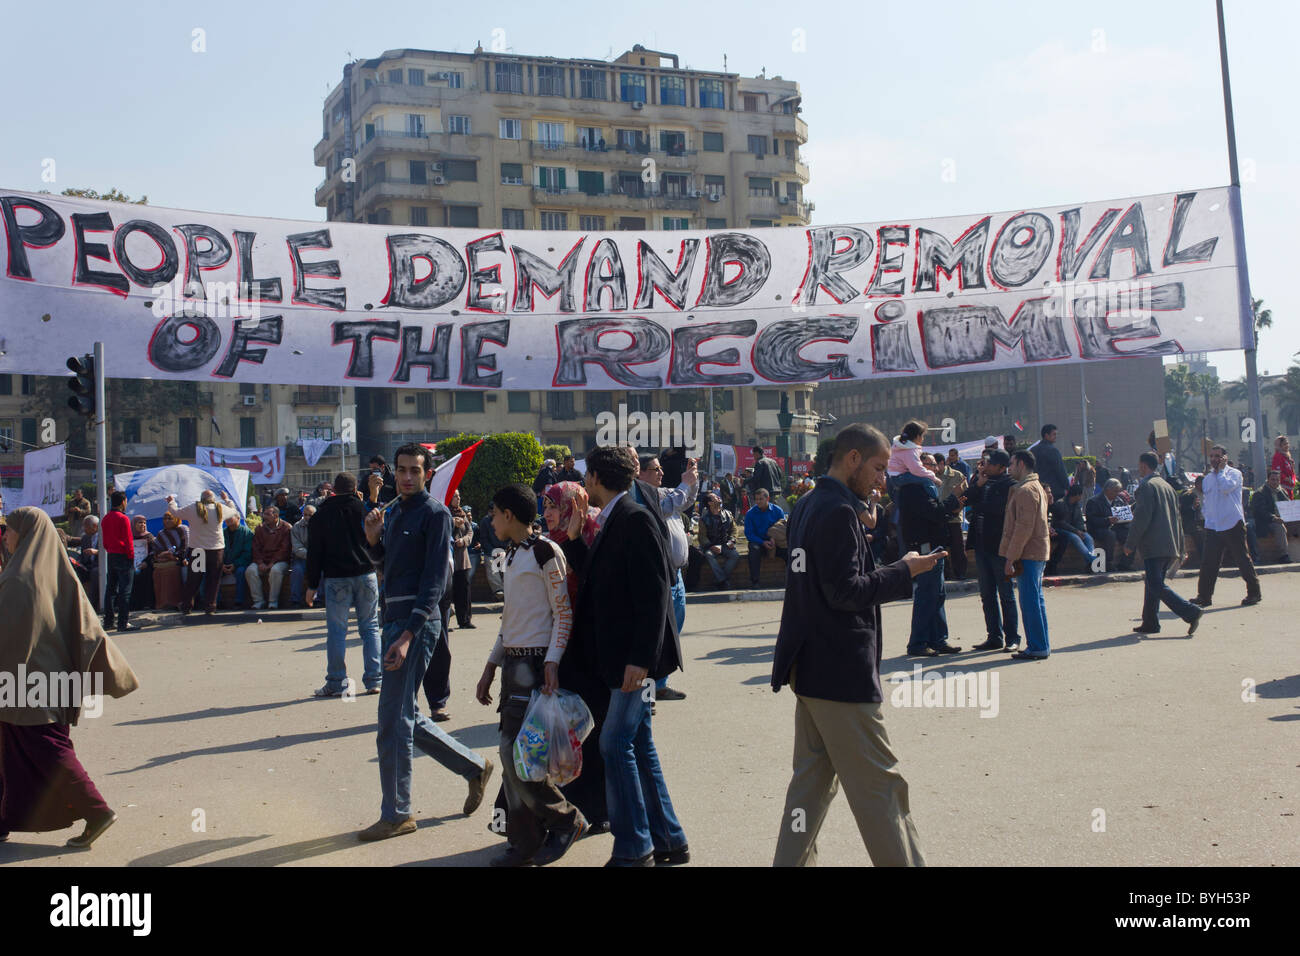 sign in Tahrir Square, Cairo, Egypt saying People demand removal of the regime Stock Photo